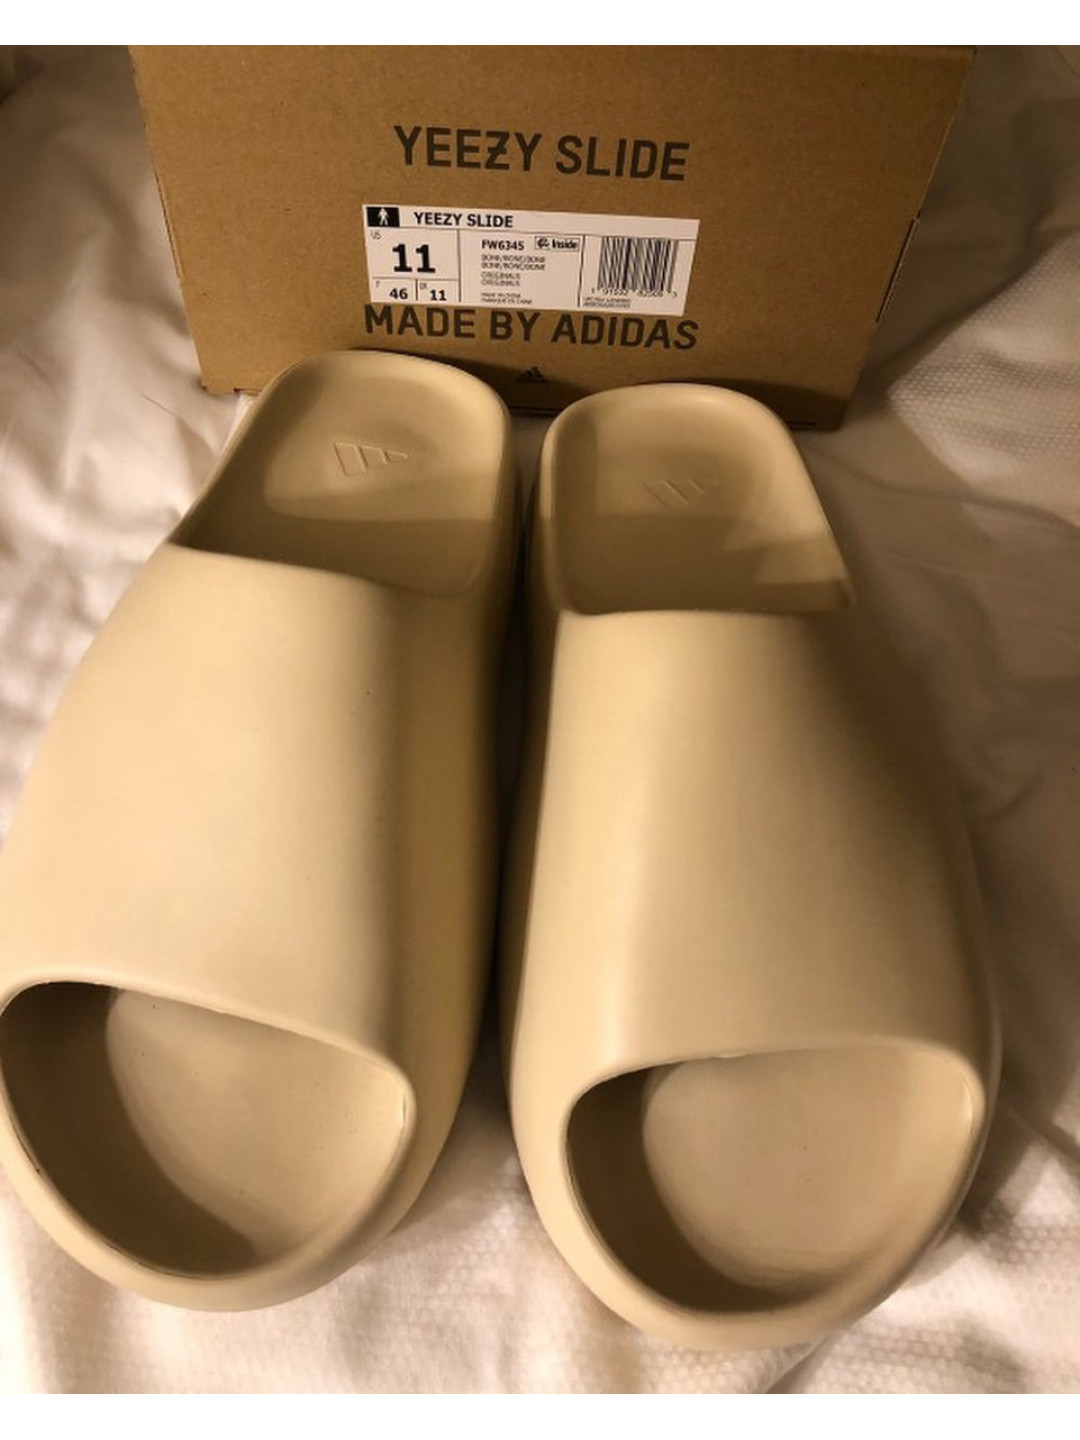 Cheap Adidas Yeezy Boost 350 V2 Used Size 9 Cream Triple White Cp9366